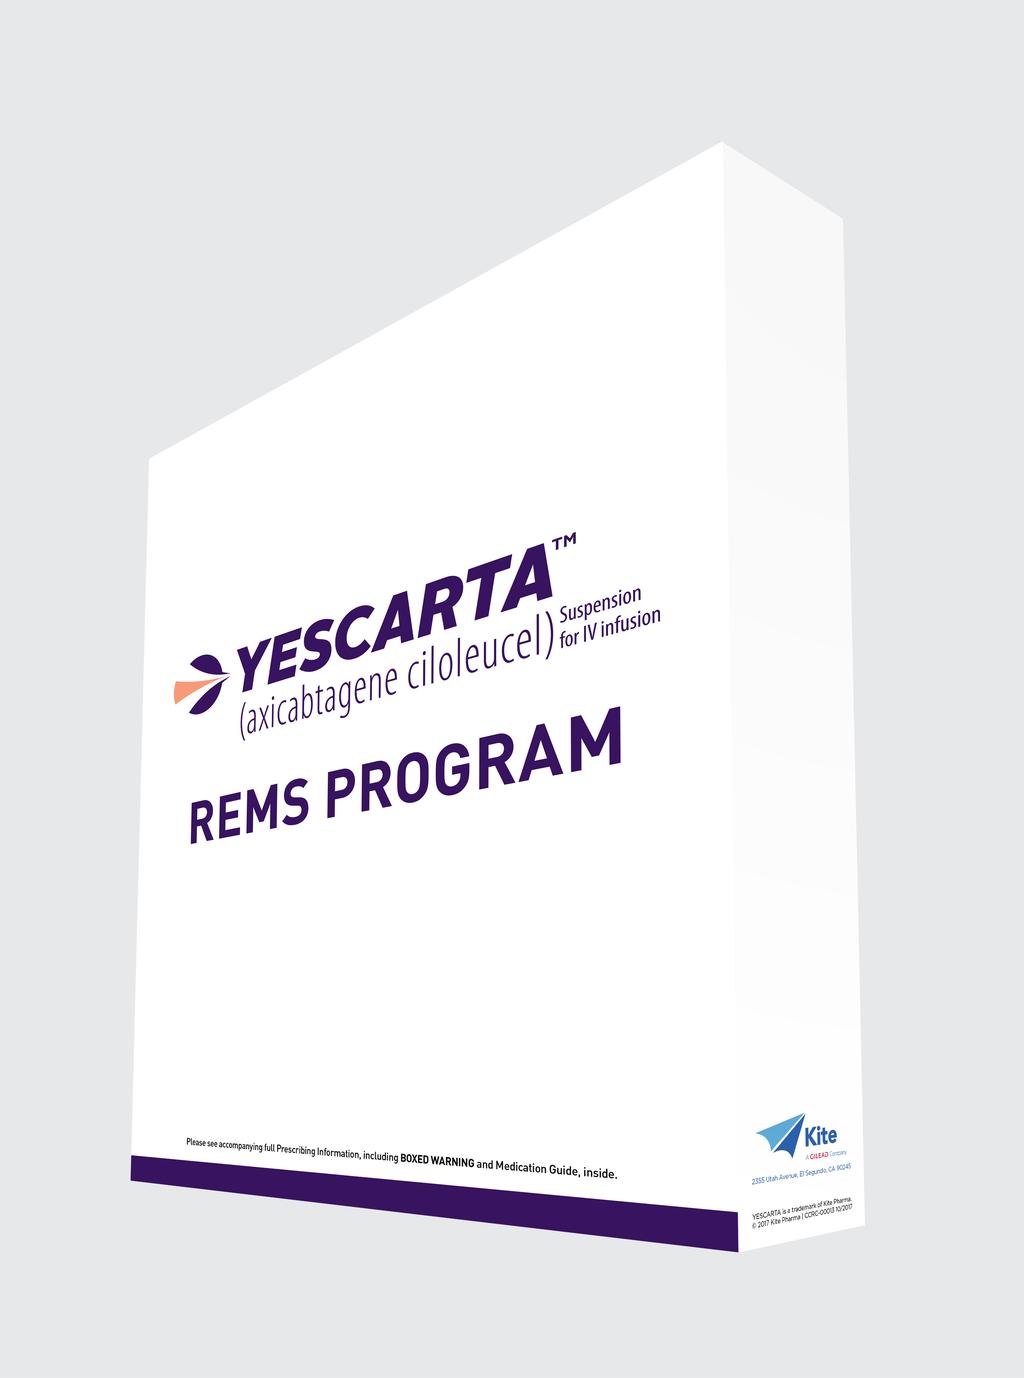 YESCARTA REMS Program Kit Includes: YESCARTA full Prescribing Information and Medication Guide YESCARTA REMS Program Live Training YESCARTA REMS